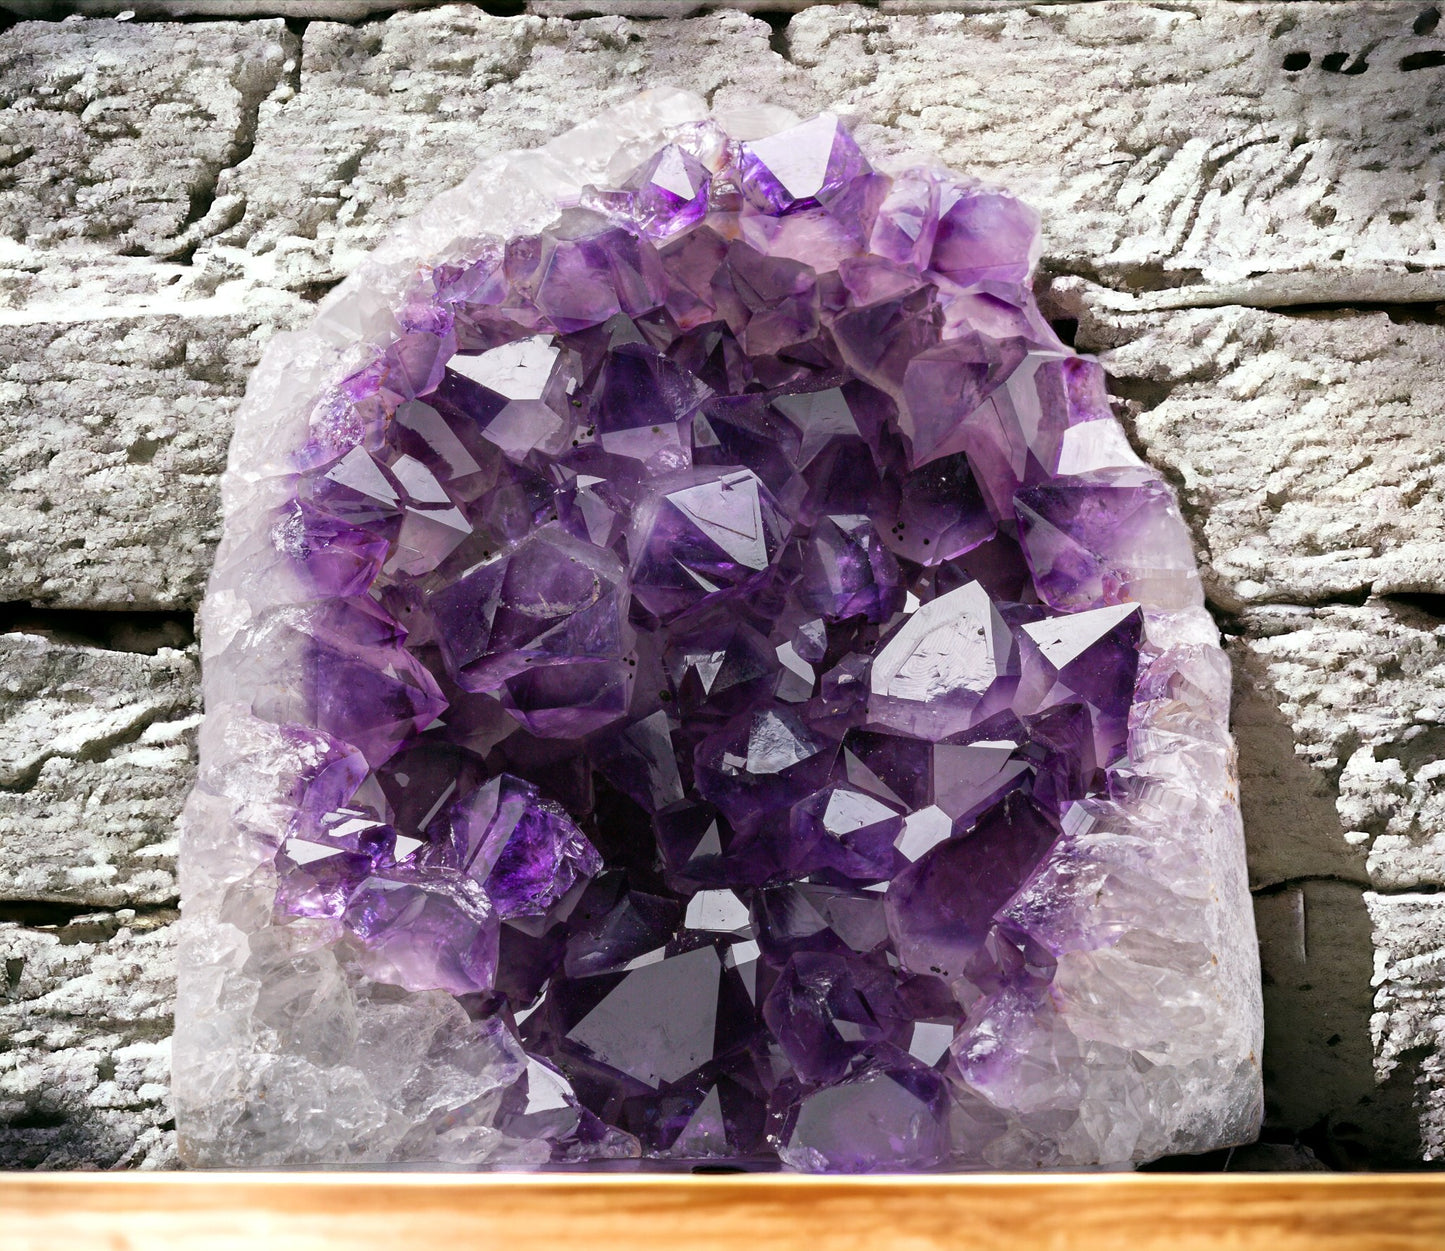 Deep Purple Natural Amethyst Crystal Clusters (1 lb to 1.5 lb) from Uruguay, Raw Geode Quartz